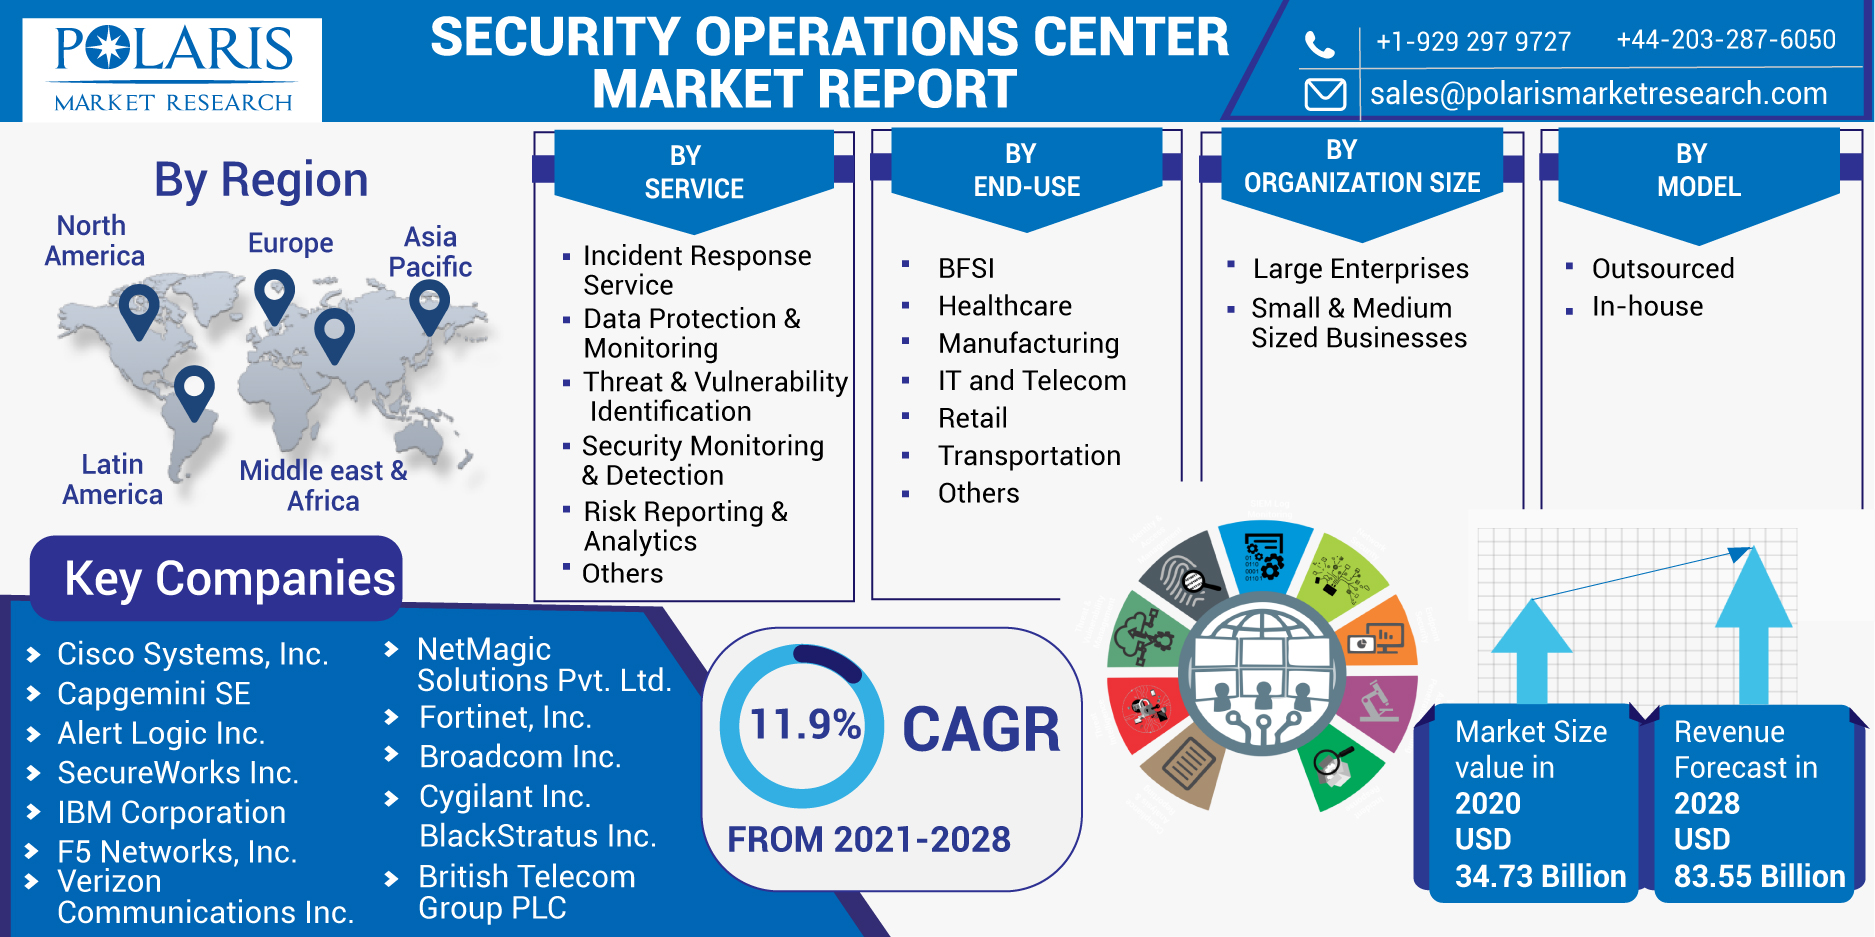 SECURITY_OPERATIONS_CENTER_MARKET-019